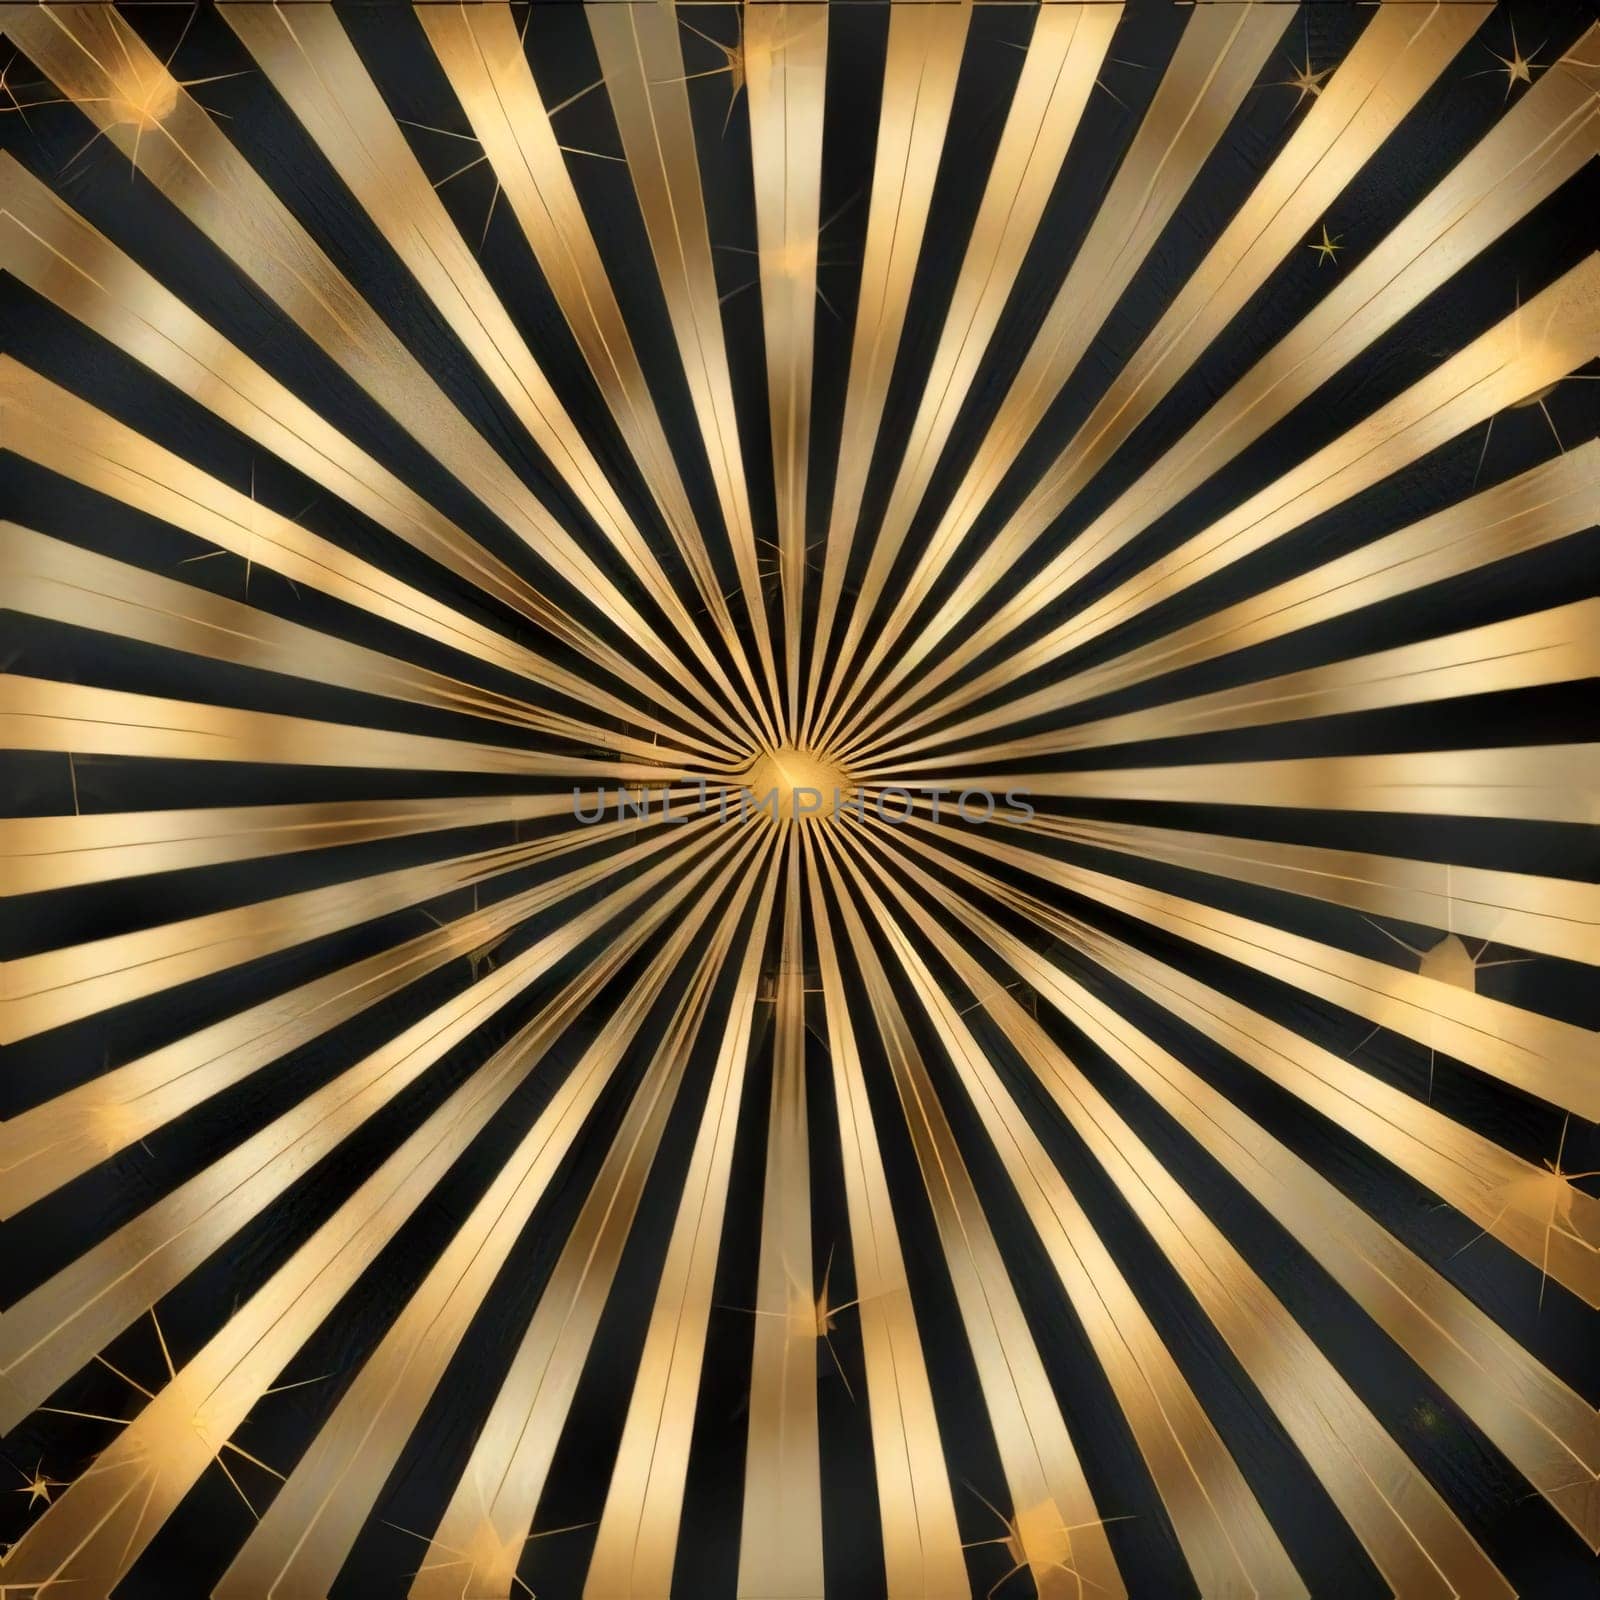 Abstract background design: Abstract golden rays on black background. Vector illustration. Eps 10.